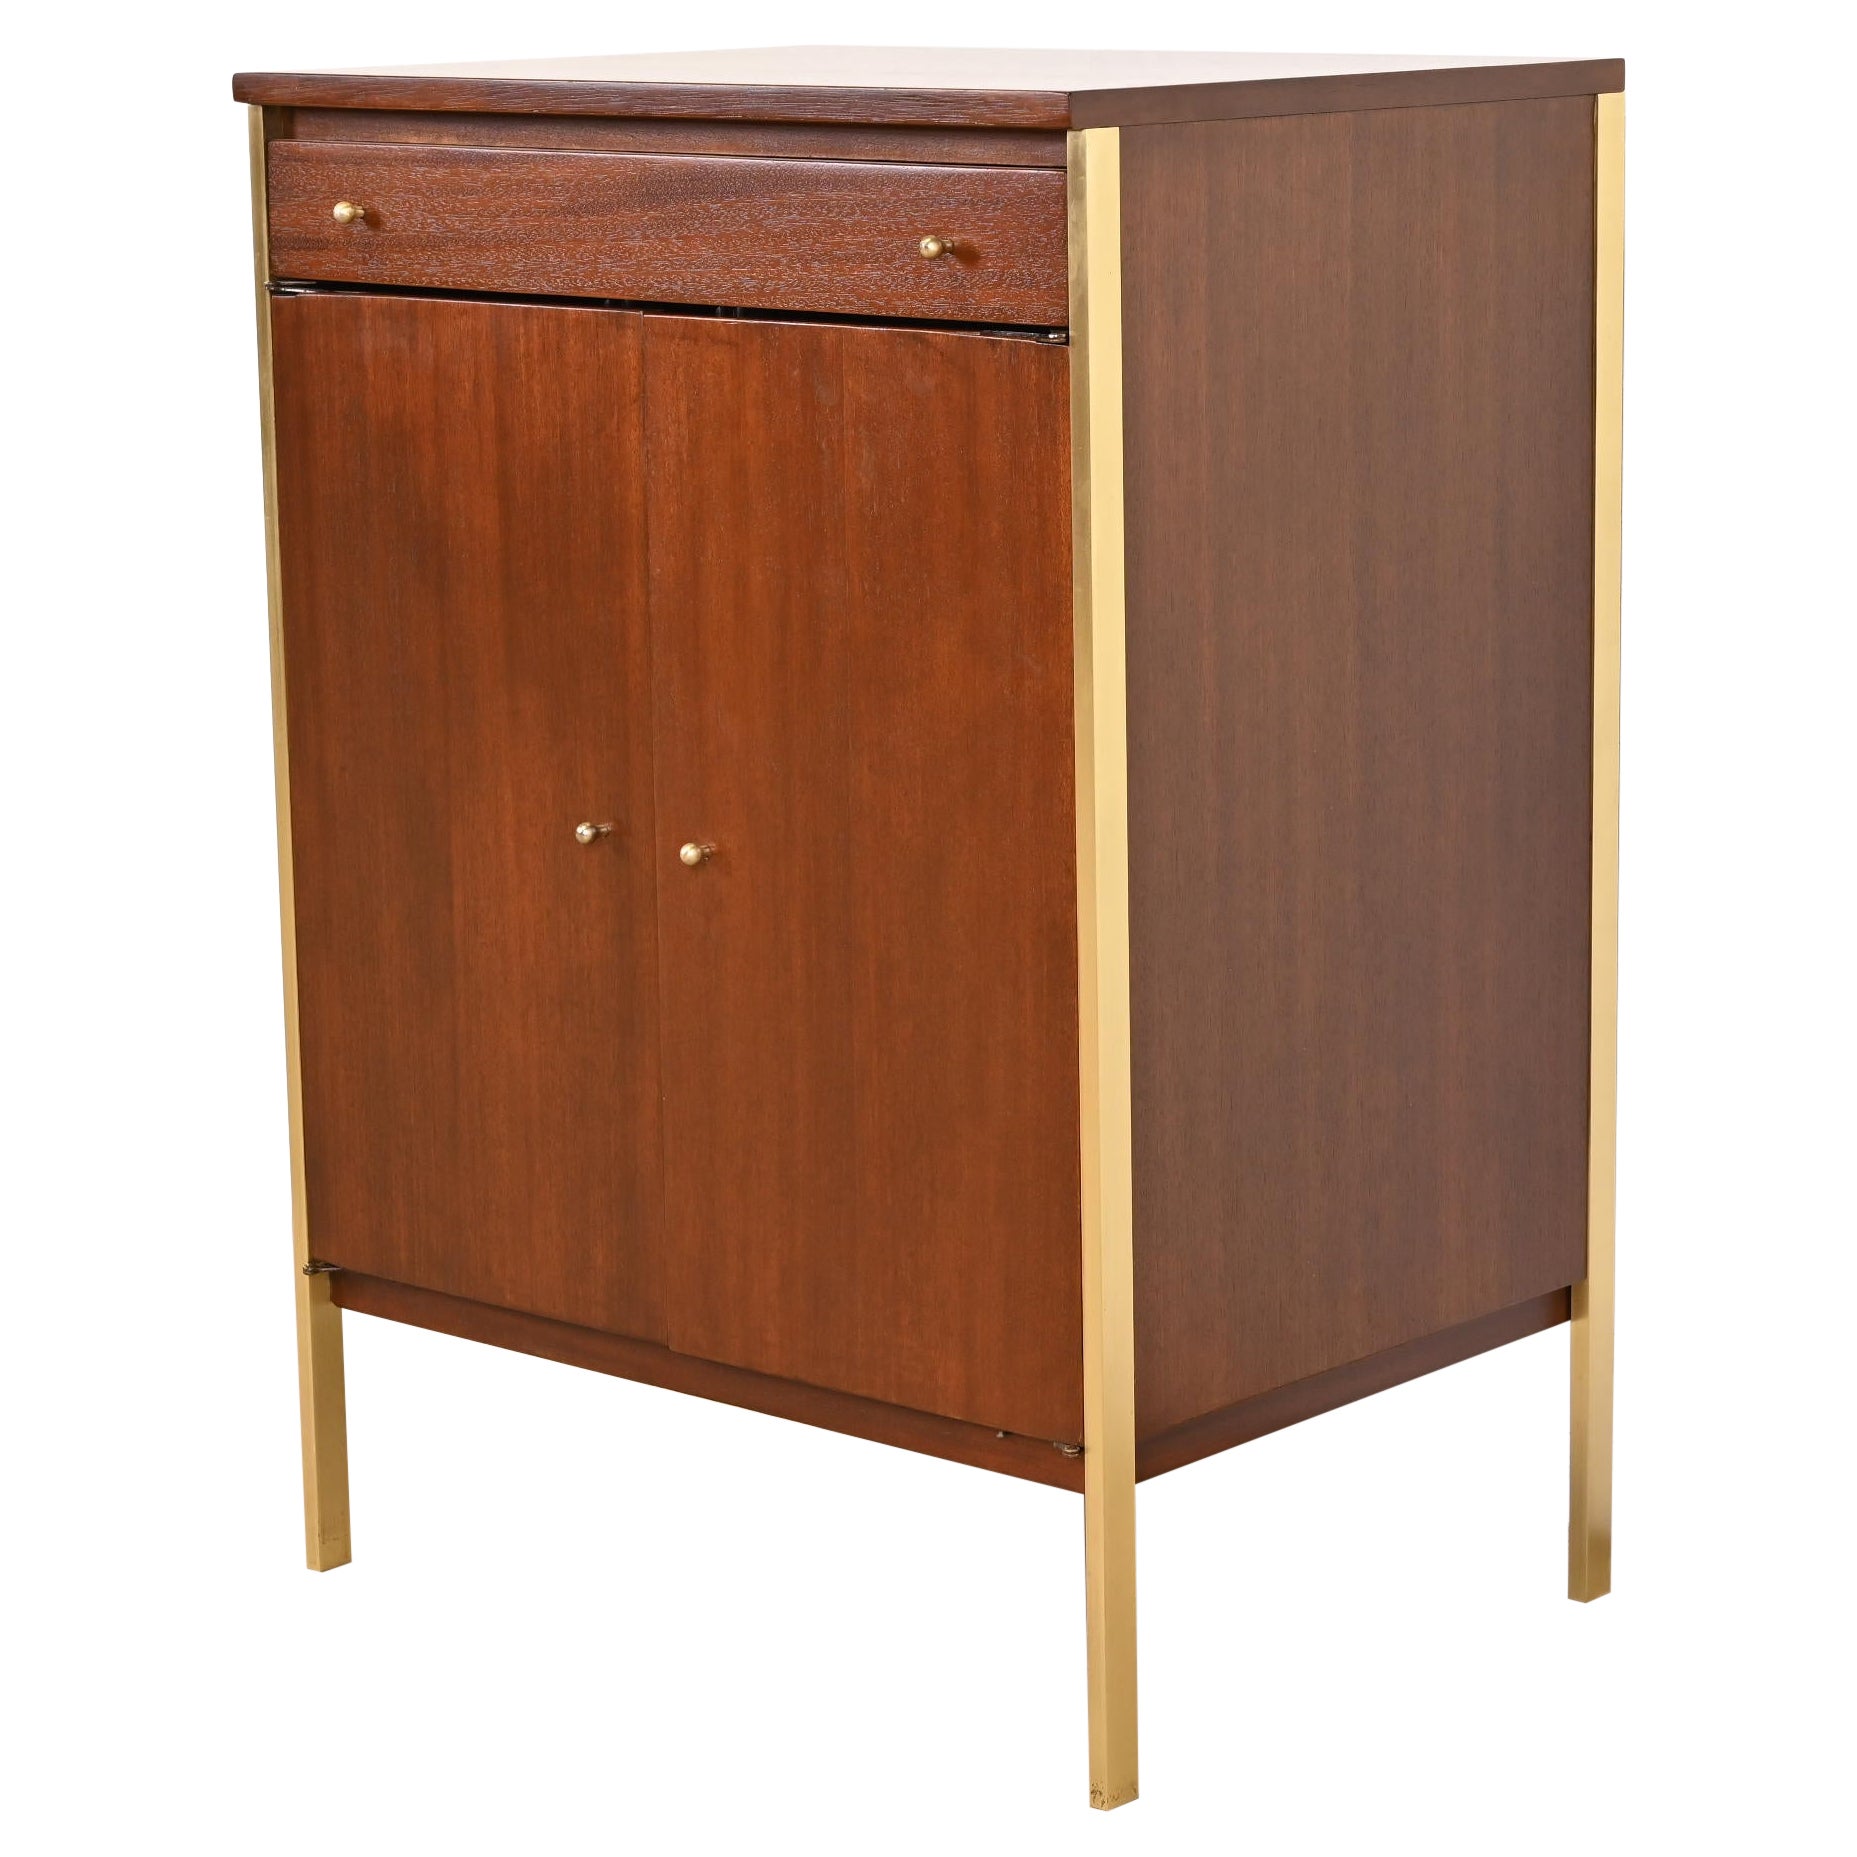 H. Sacks & Sons Cabinets